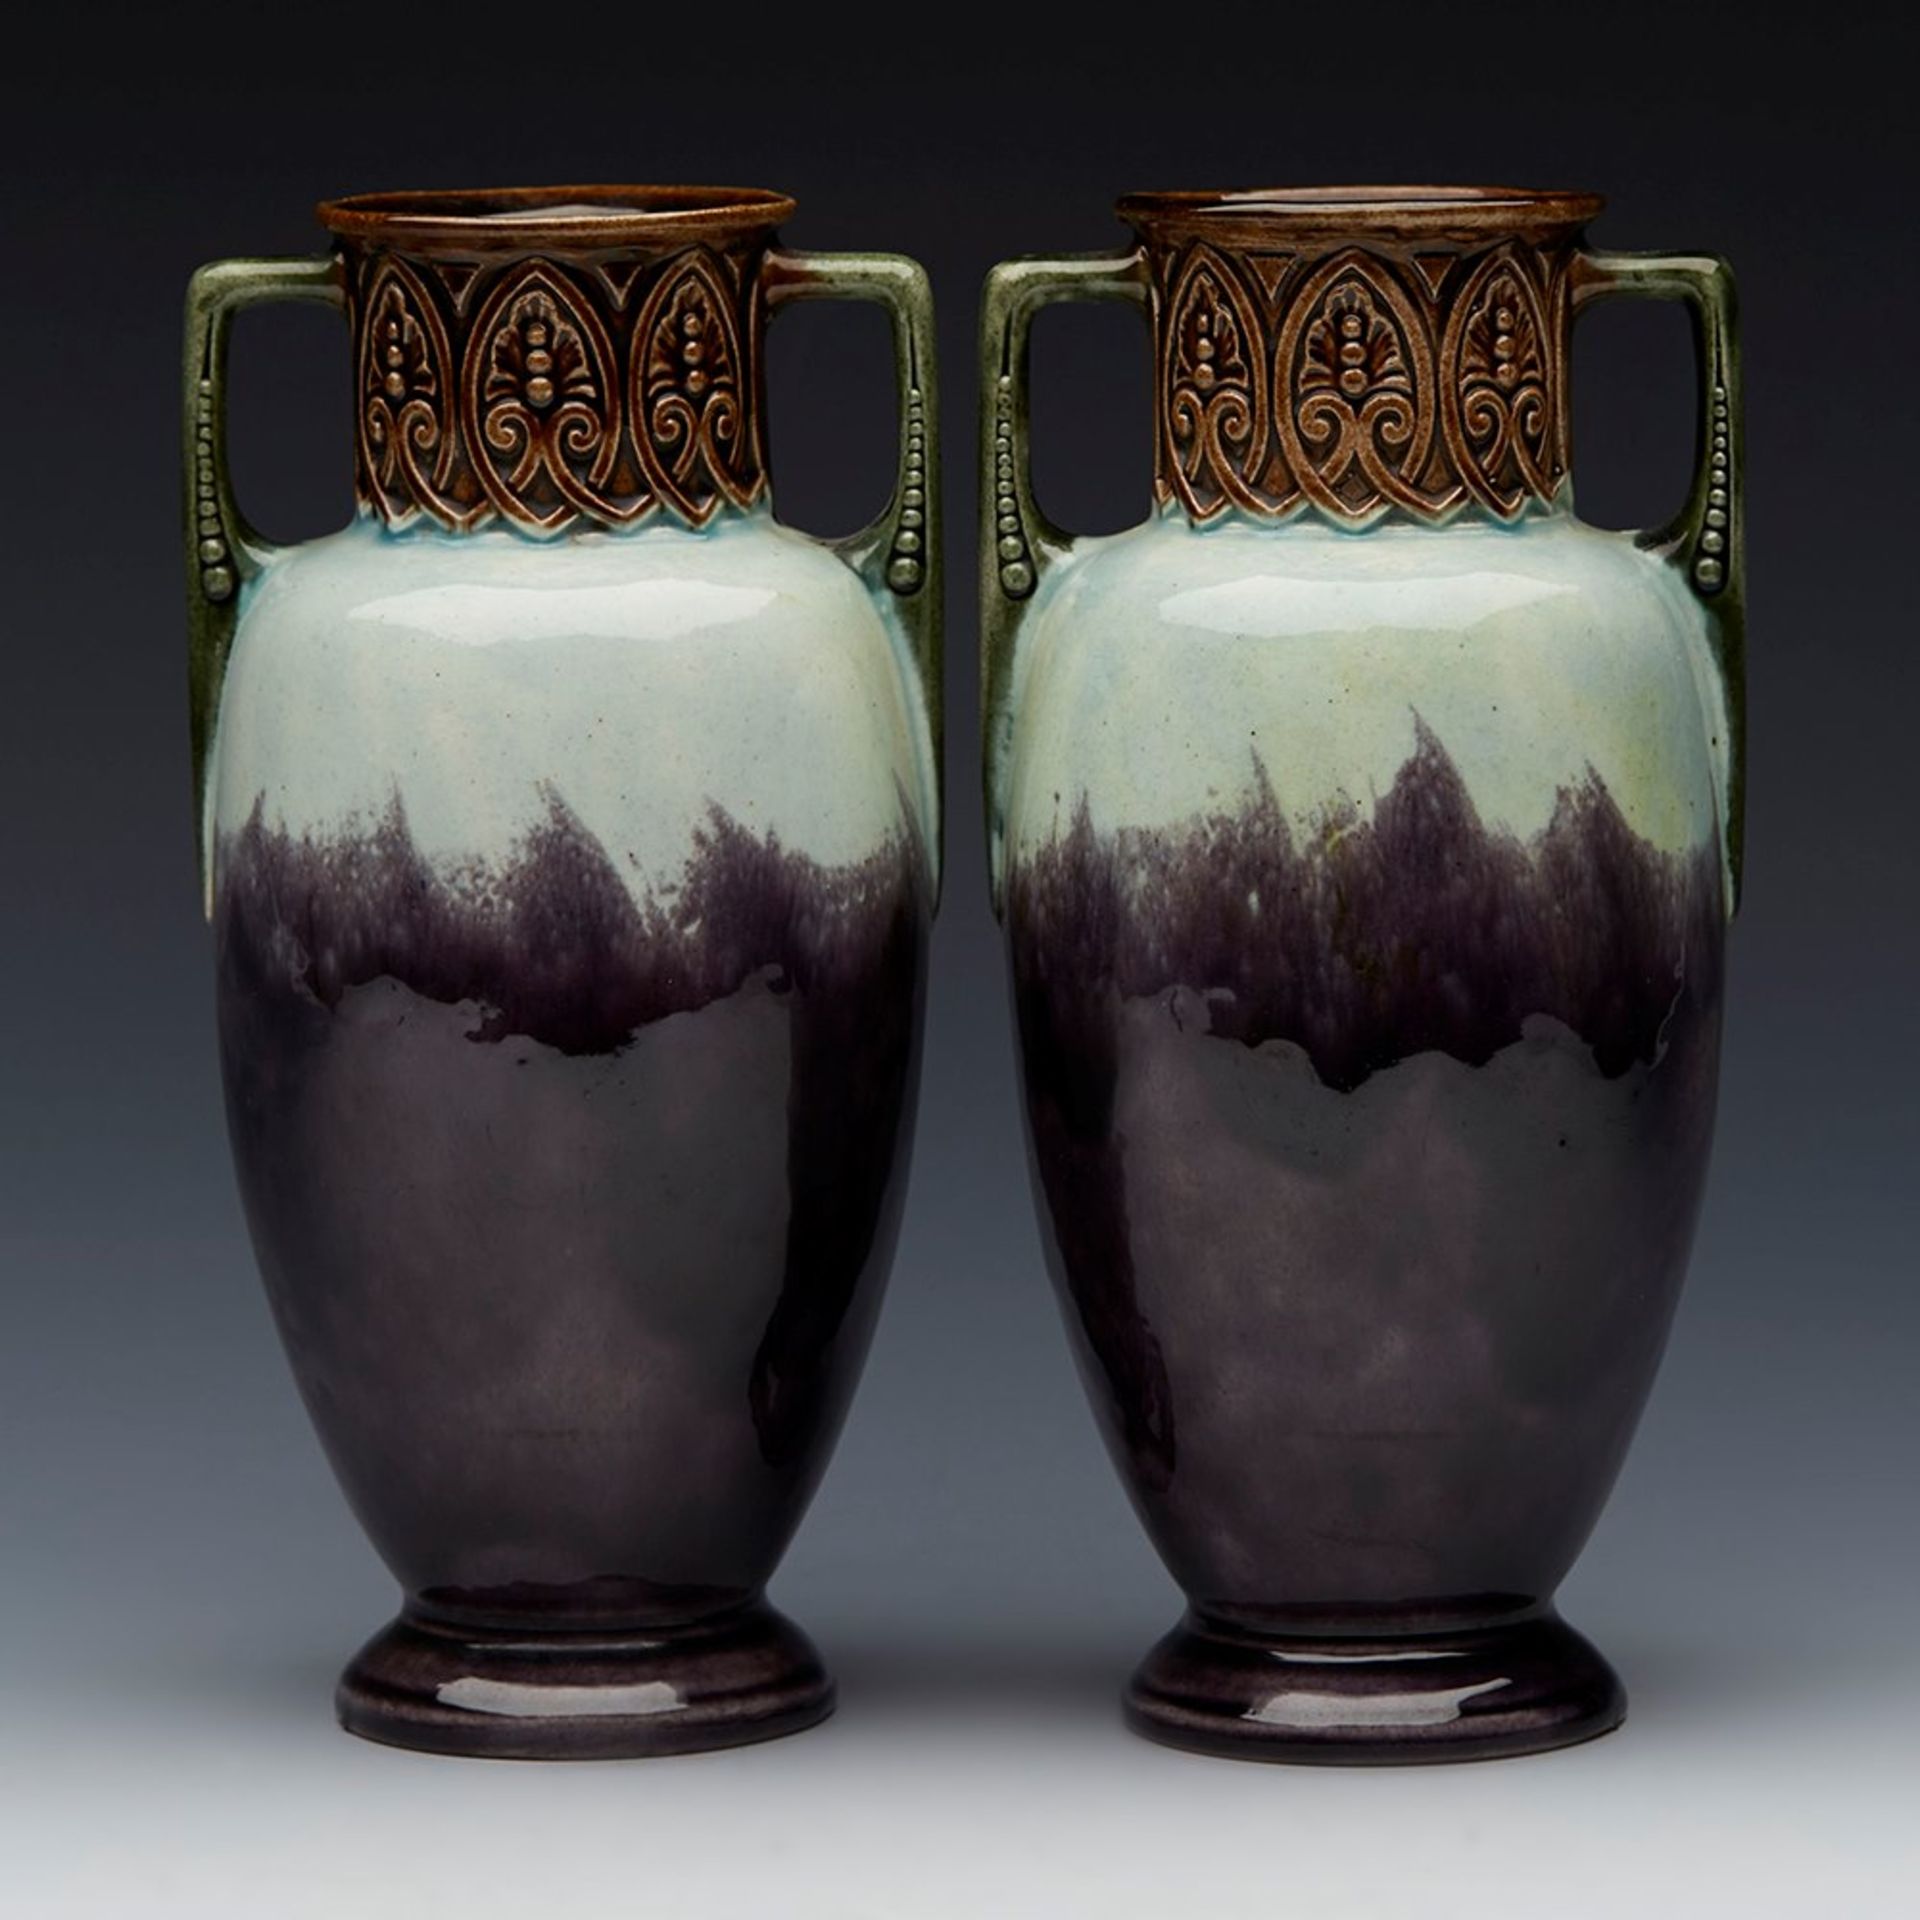 PAIR ANTIQUE CONTINENTAL MAJOLICA LANDSCAPE PAINTED VASES 19TH C.   DIMENSIONS   Height 17,5cm, - Image 4 of 9